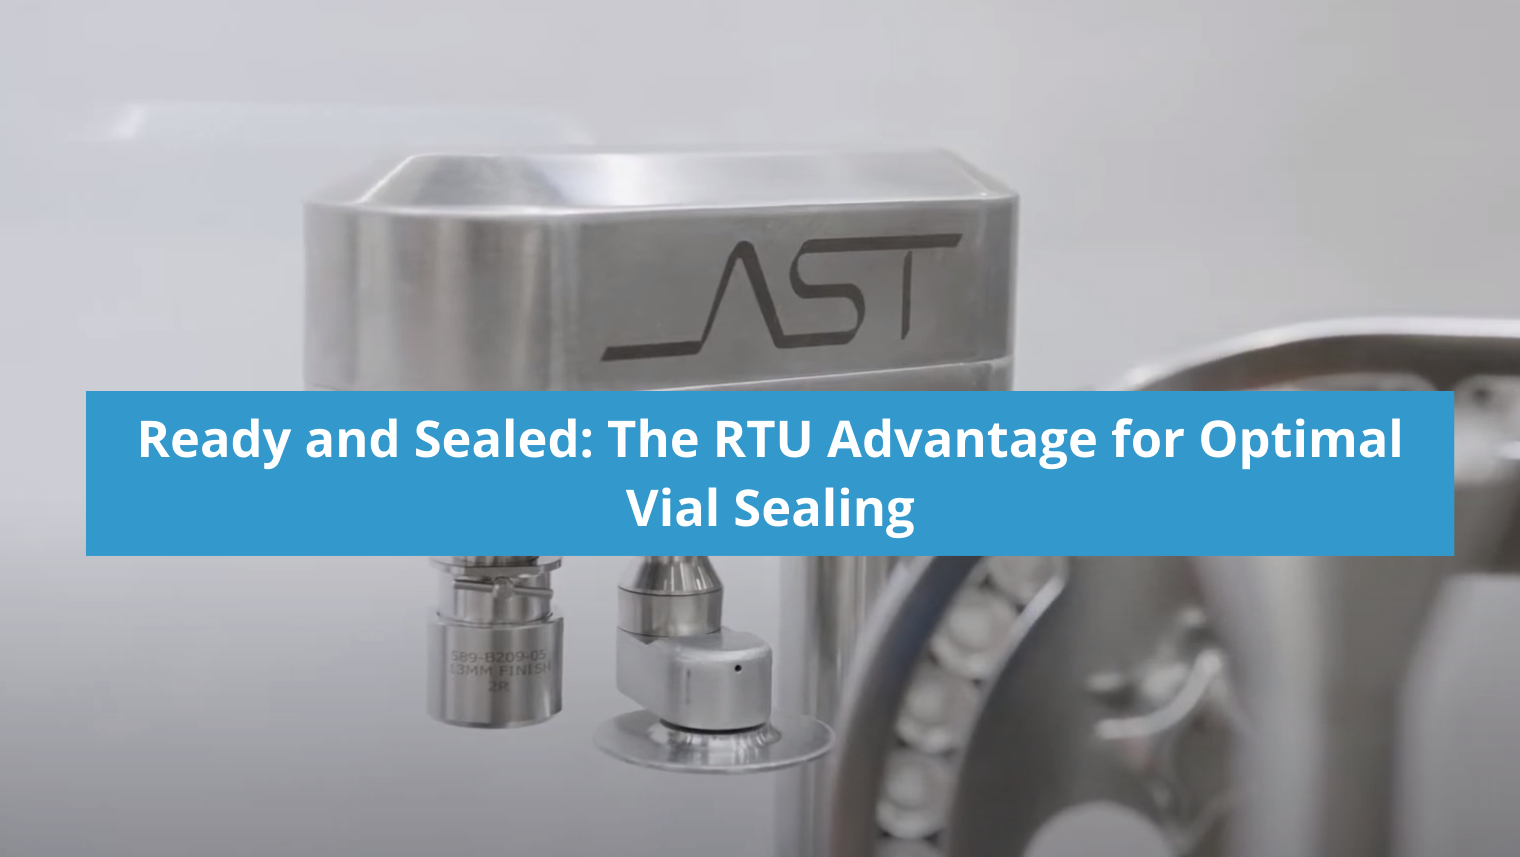 Ready and Sealed: The RTU Advantage for Optimal Vial Sealing